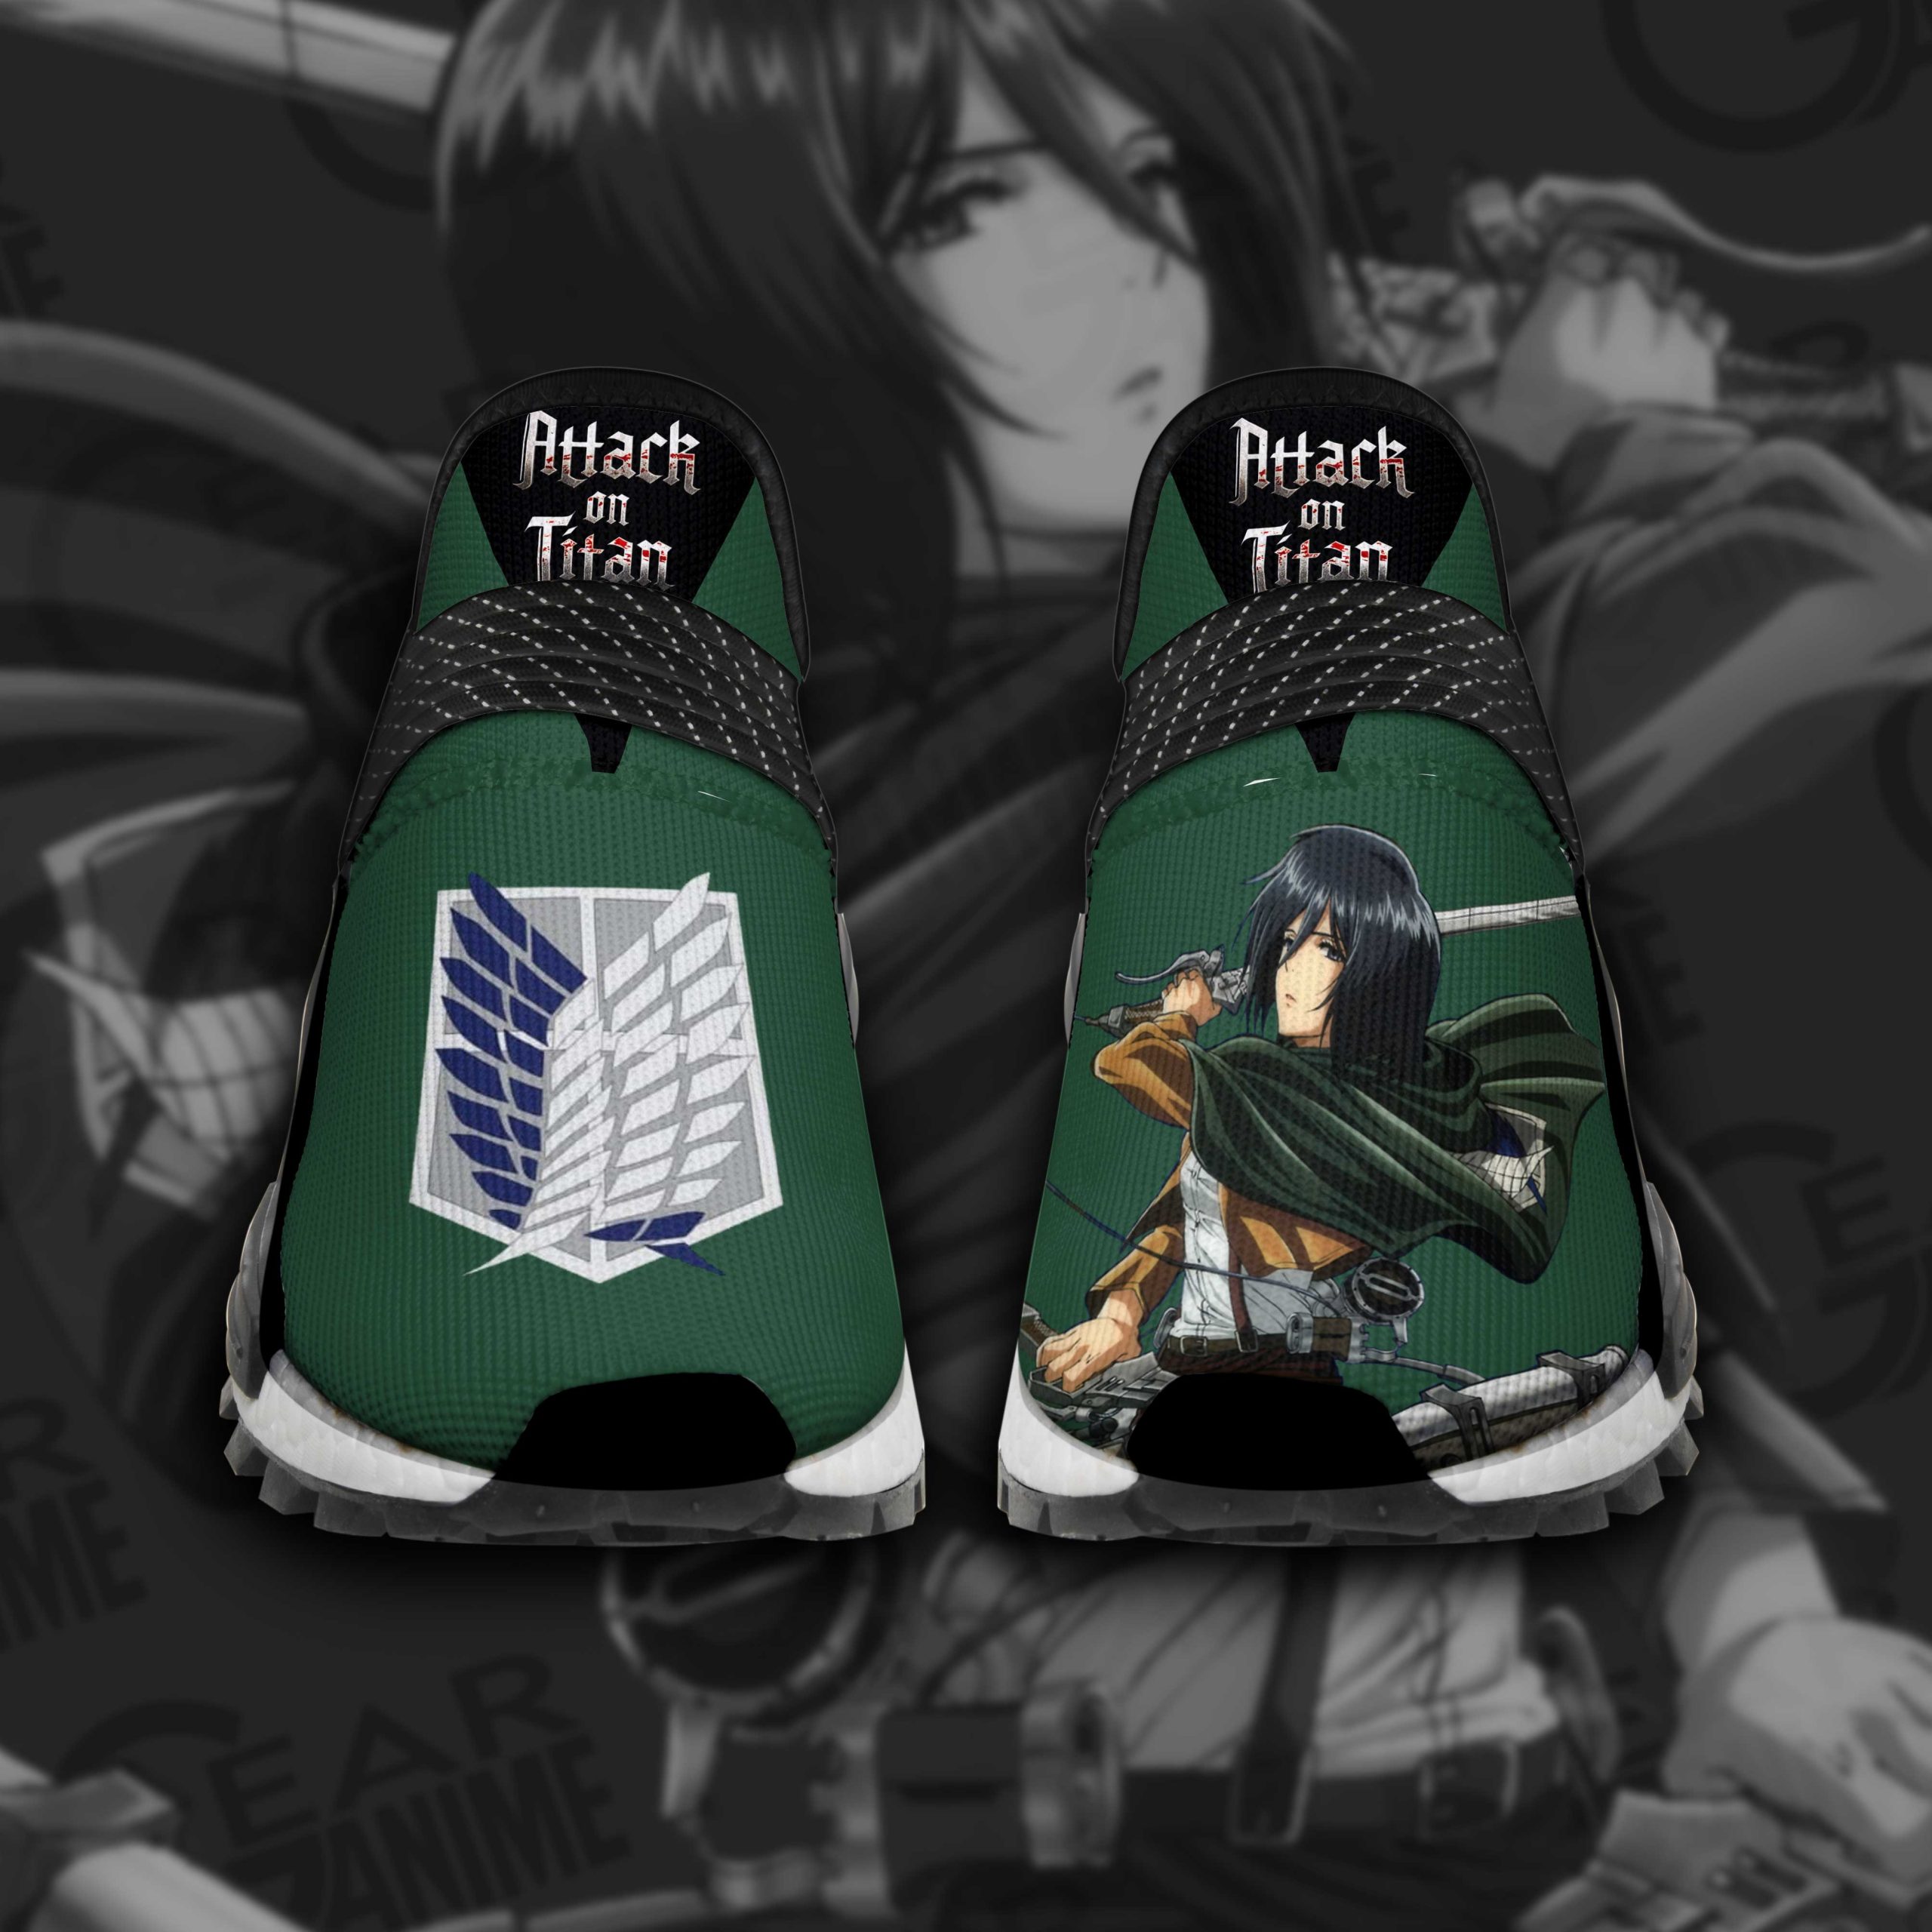 Mikasa Shoes Scout Team Attack On Titan Anime Shoes TT11